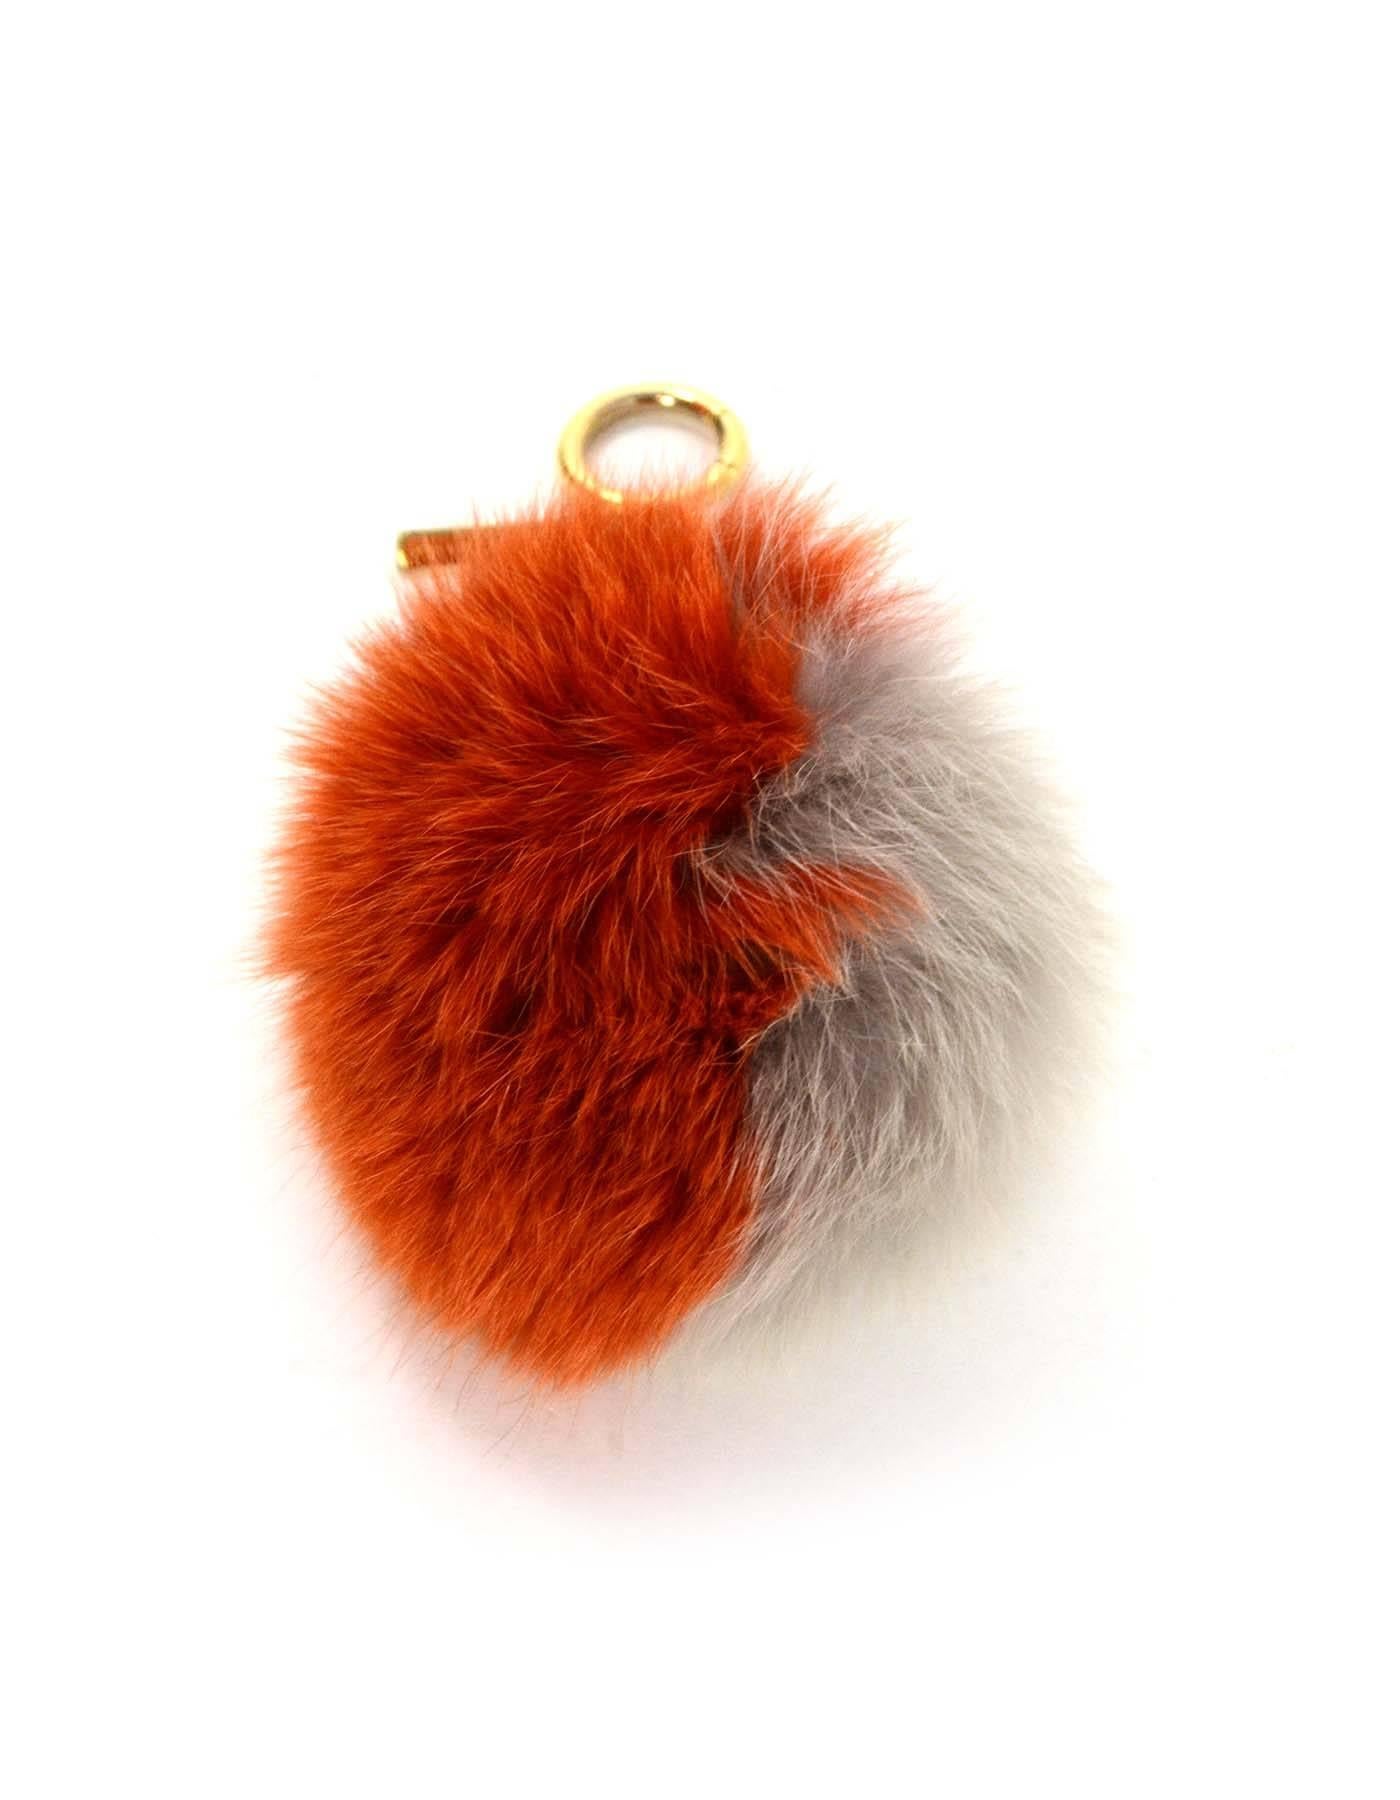 Fendi Grey & Orange Fox Fur Pom Pom 
Features orange textured leather strap
Made In: Italy
Color: Orange and grey
Hardware: Goldtone
Materials: Fox fur, leather, and metal
Closure/Opening: Jump ring with push hinge
Stamp: Fendi Made in